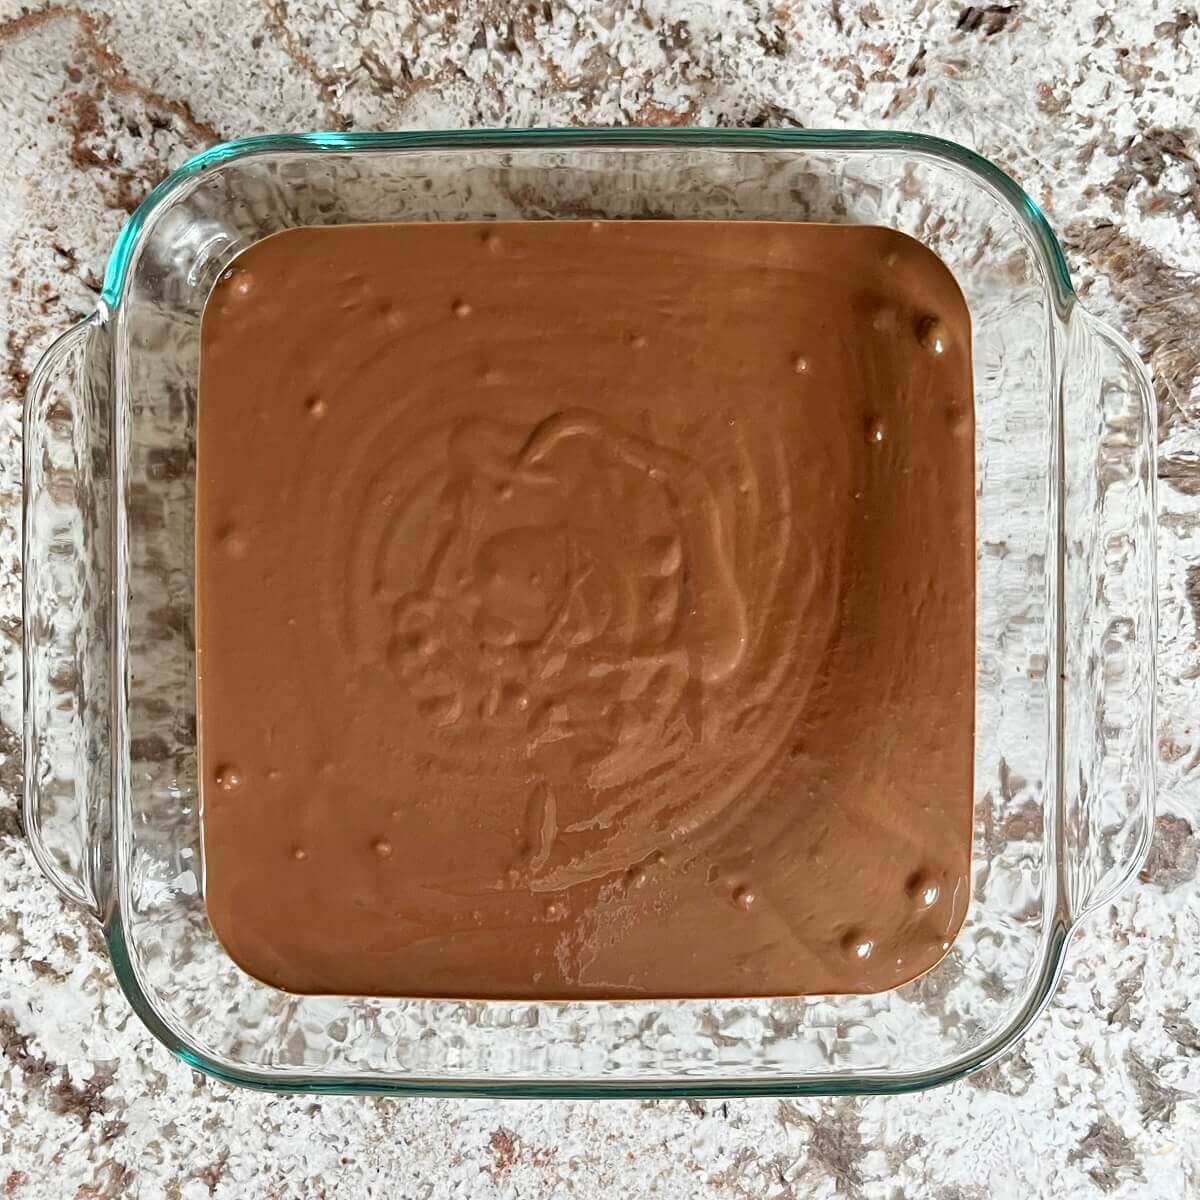 Chocolate mousse in a square glass baking dish.